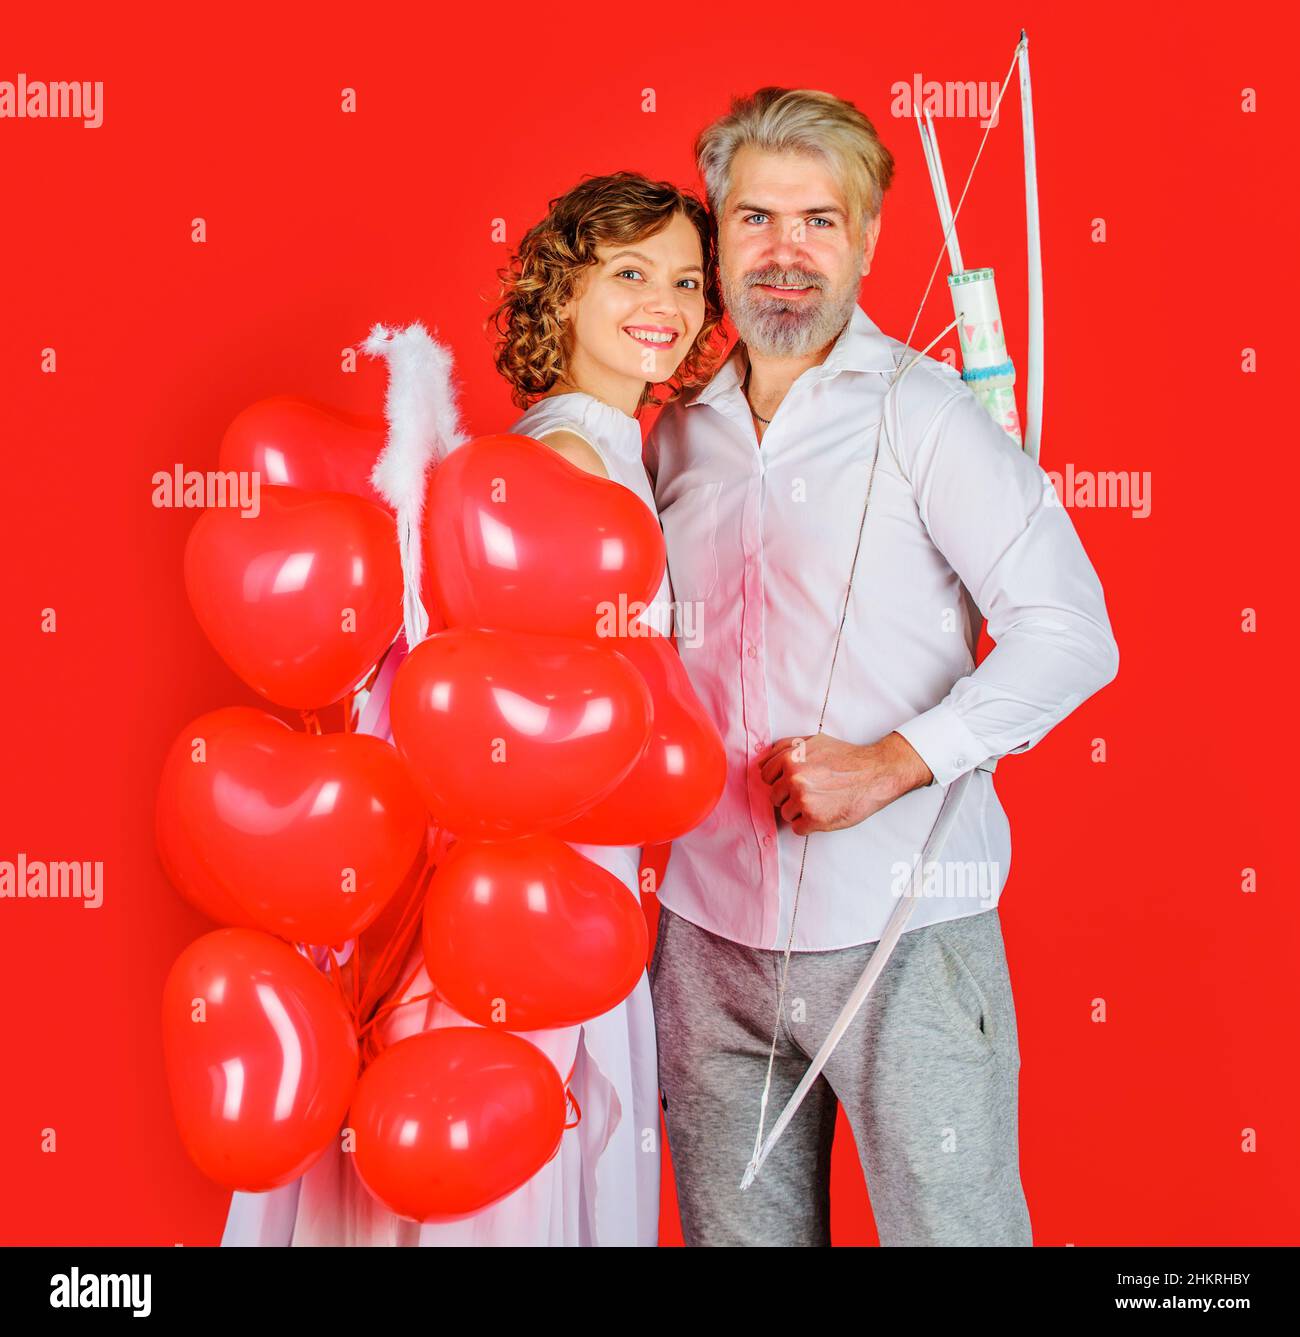 Valentines day couple. Angel with heart shape balloons. Cupid with bow and arrows. Relationships. Stock Photo